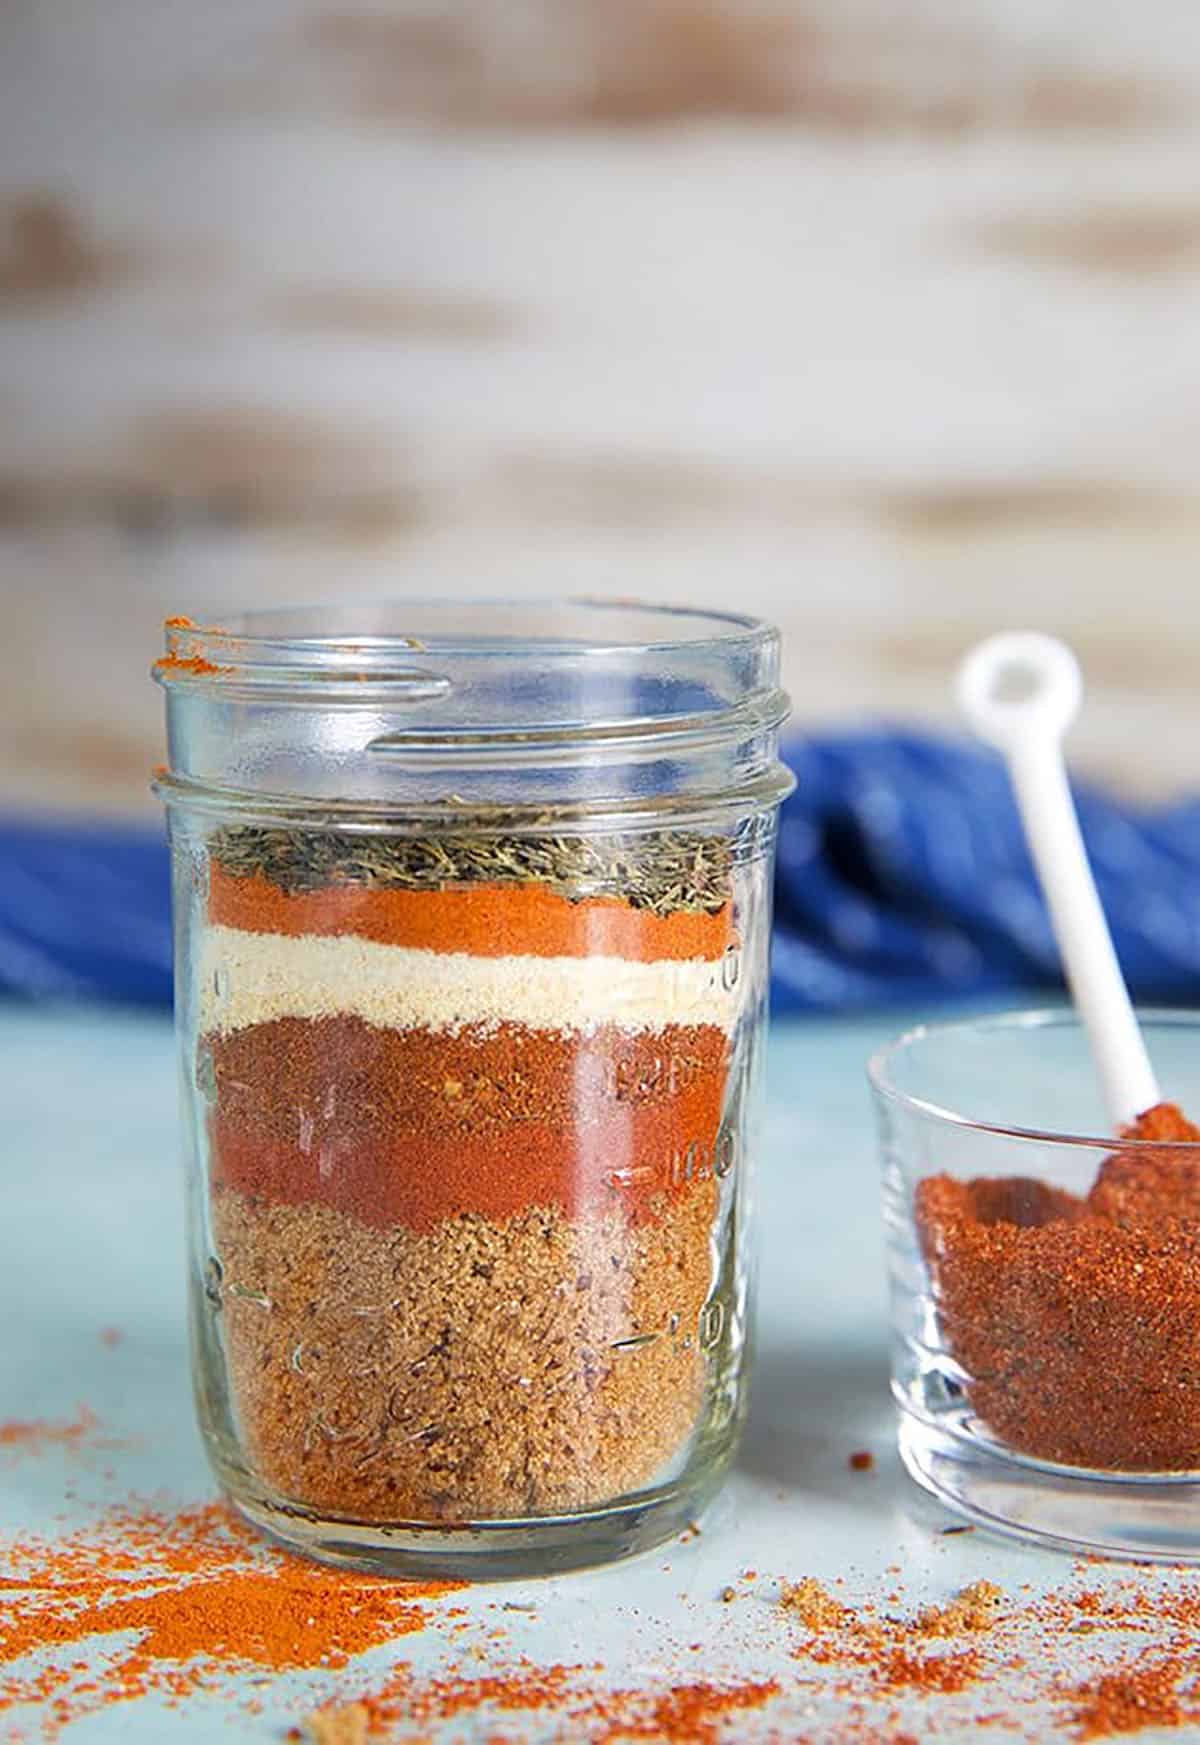 Dry Rub for chicken ingredients layered in a glass jar.